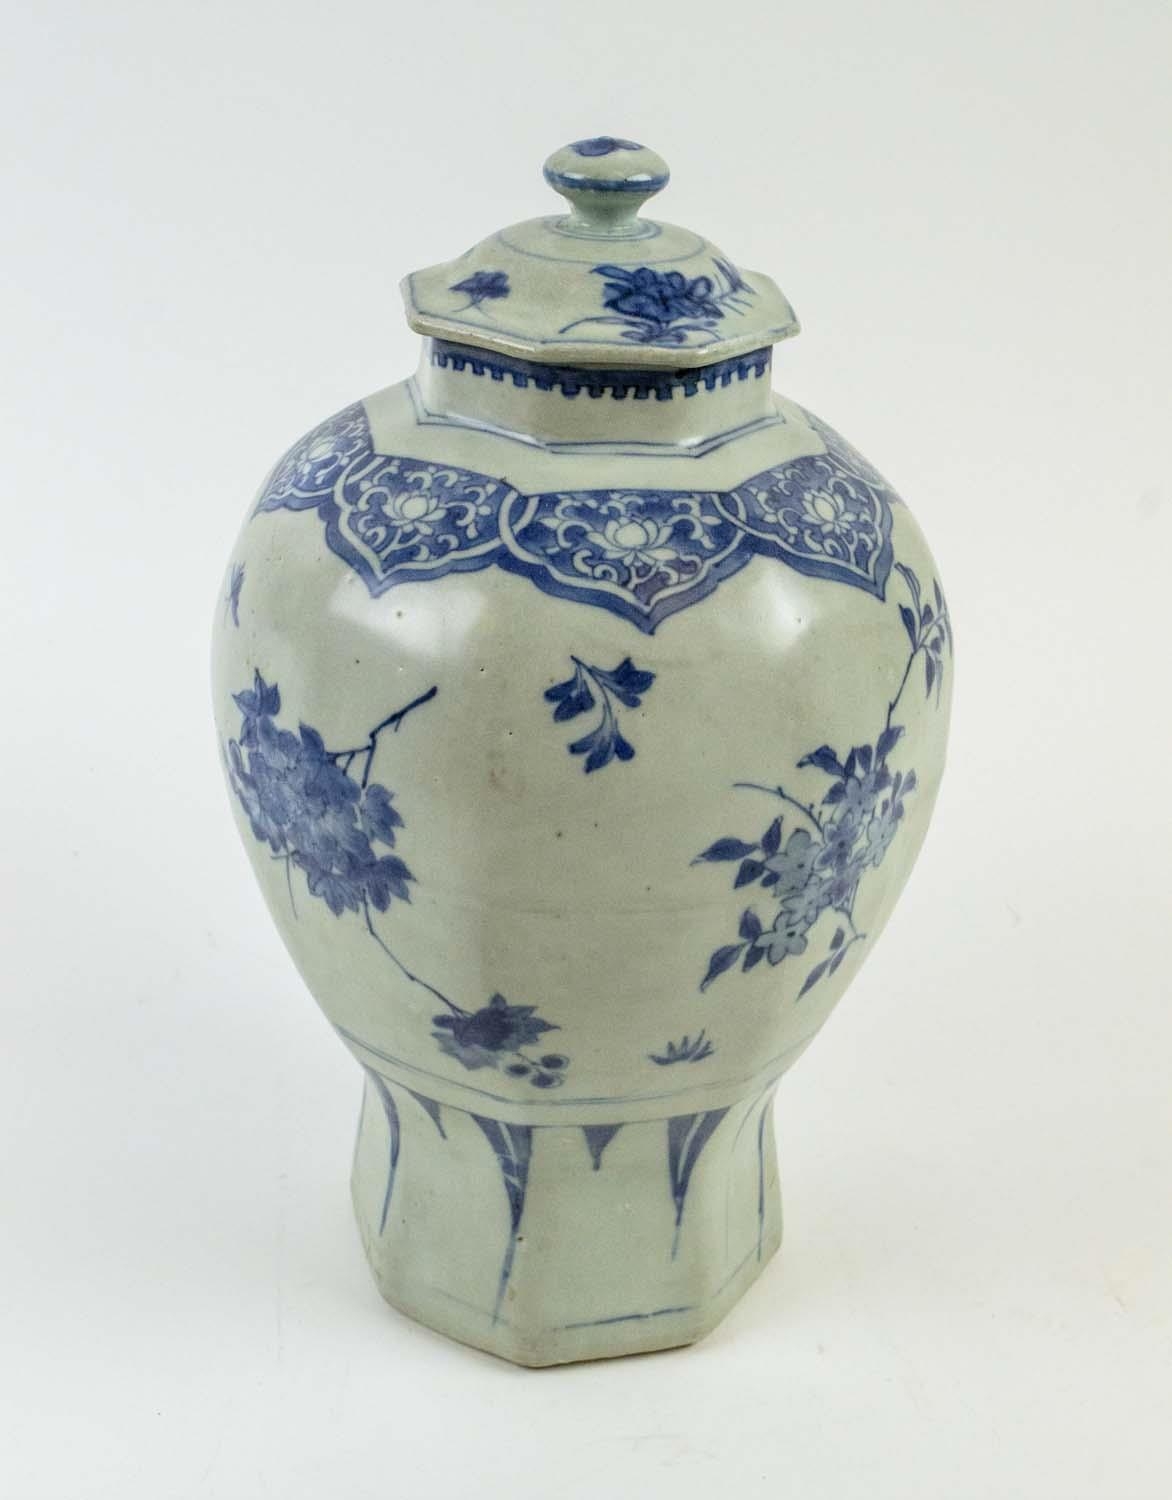 TRANSITIONAL 'HATCHER CARGO' OCTAGONAL BLUE AND WHITE BALUSTER VASE, circa 1640, with lid, decorated - Image 3 of 5